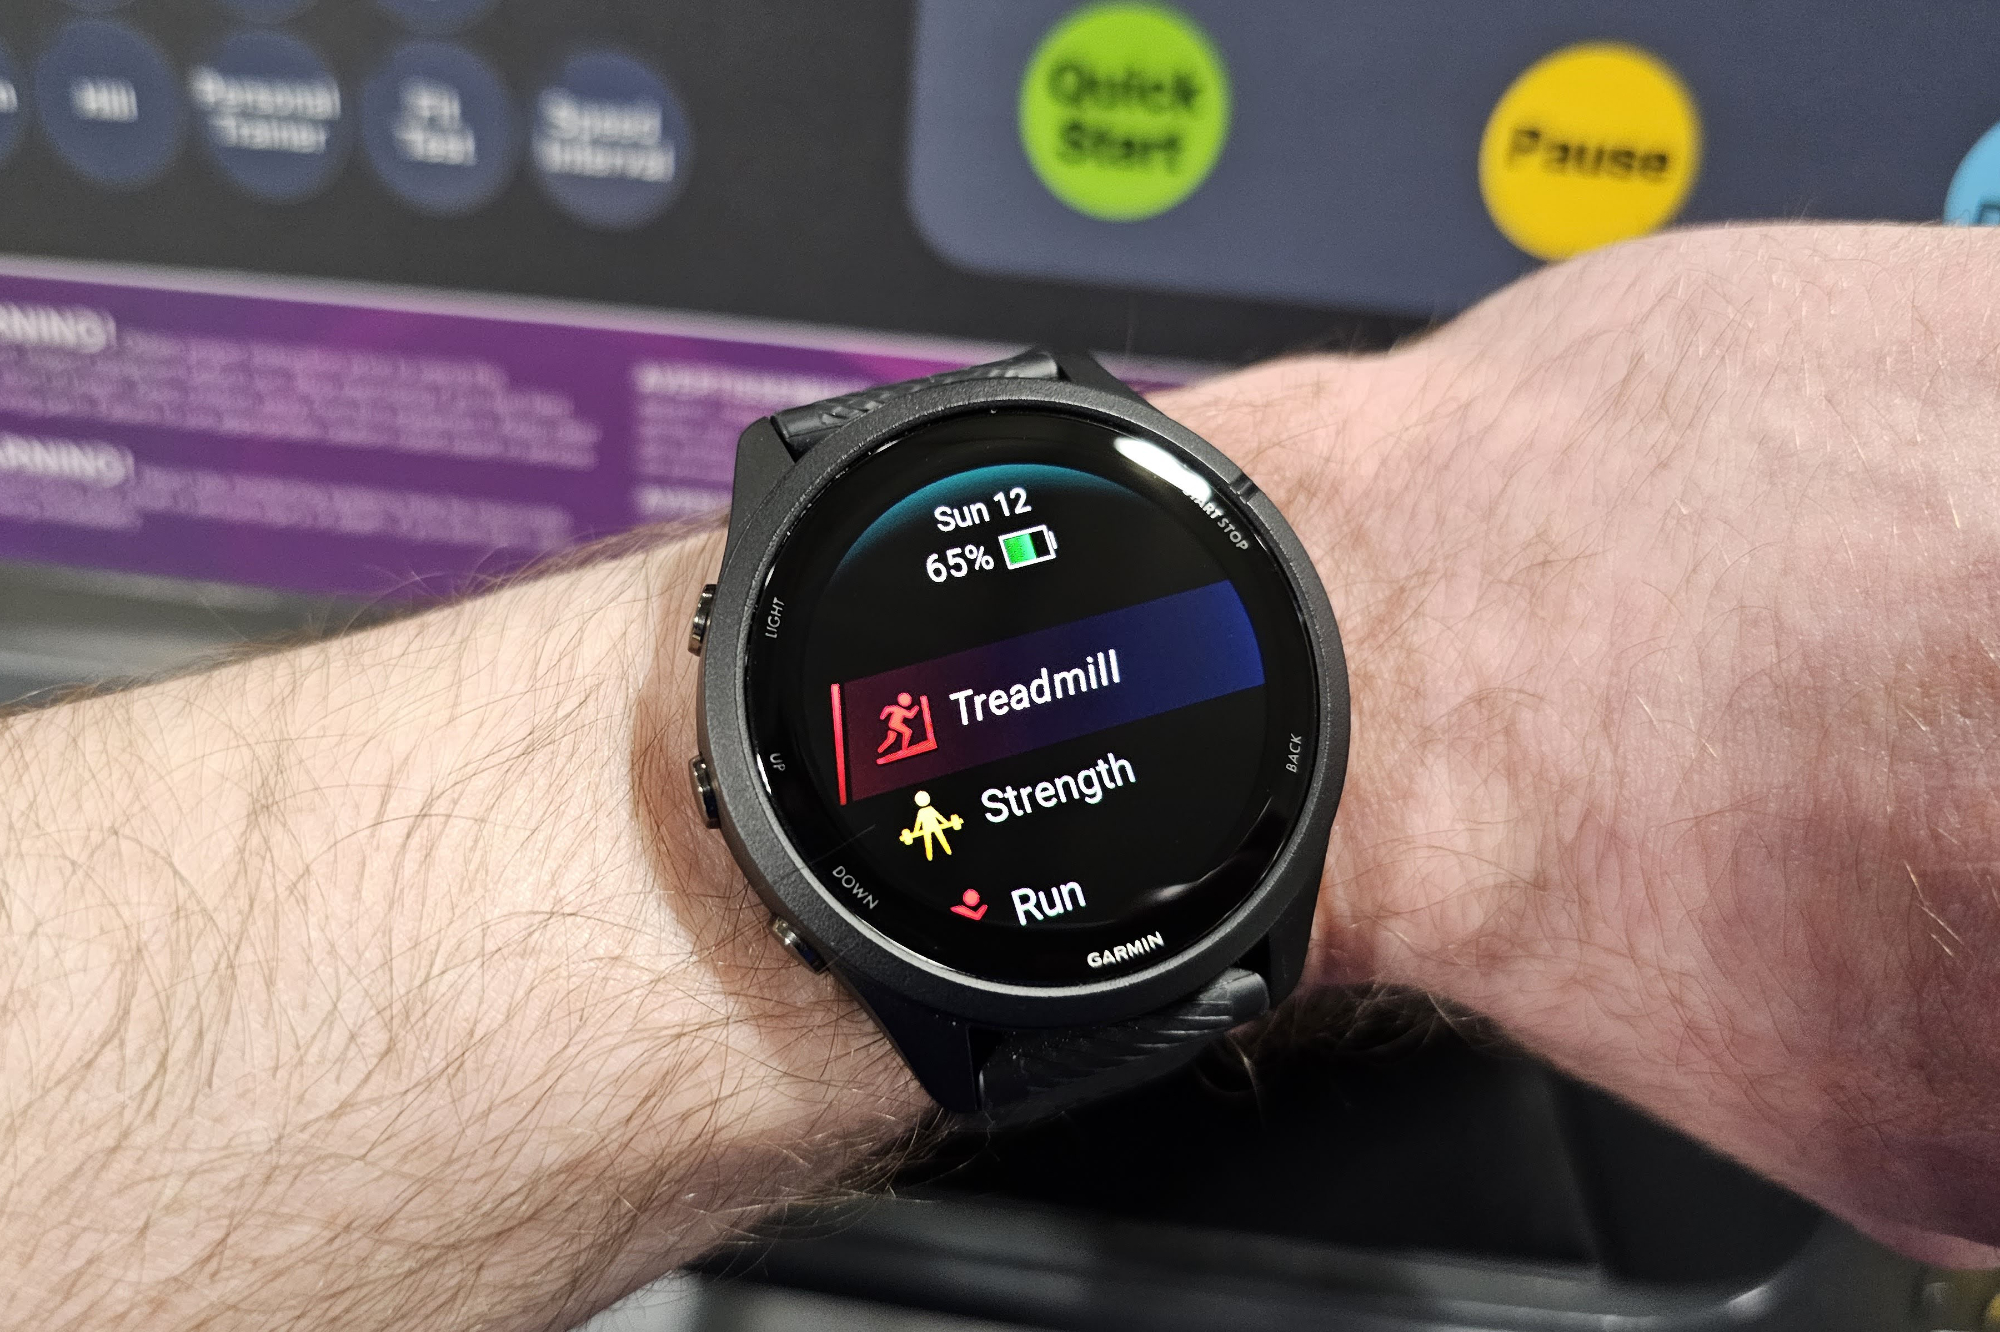 Dressing up the 265 + my thoughts coming from Samsung : r/Garmin